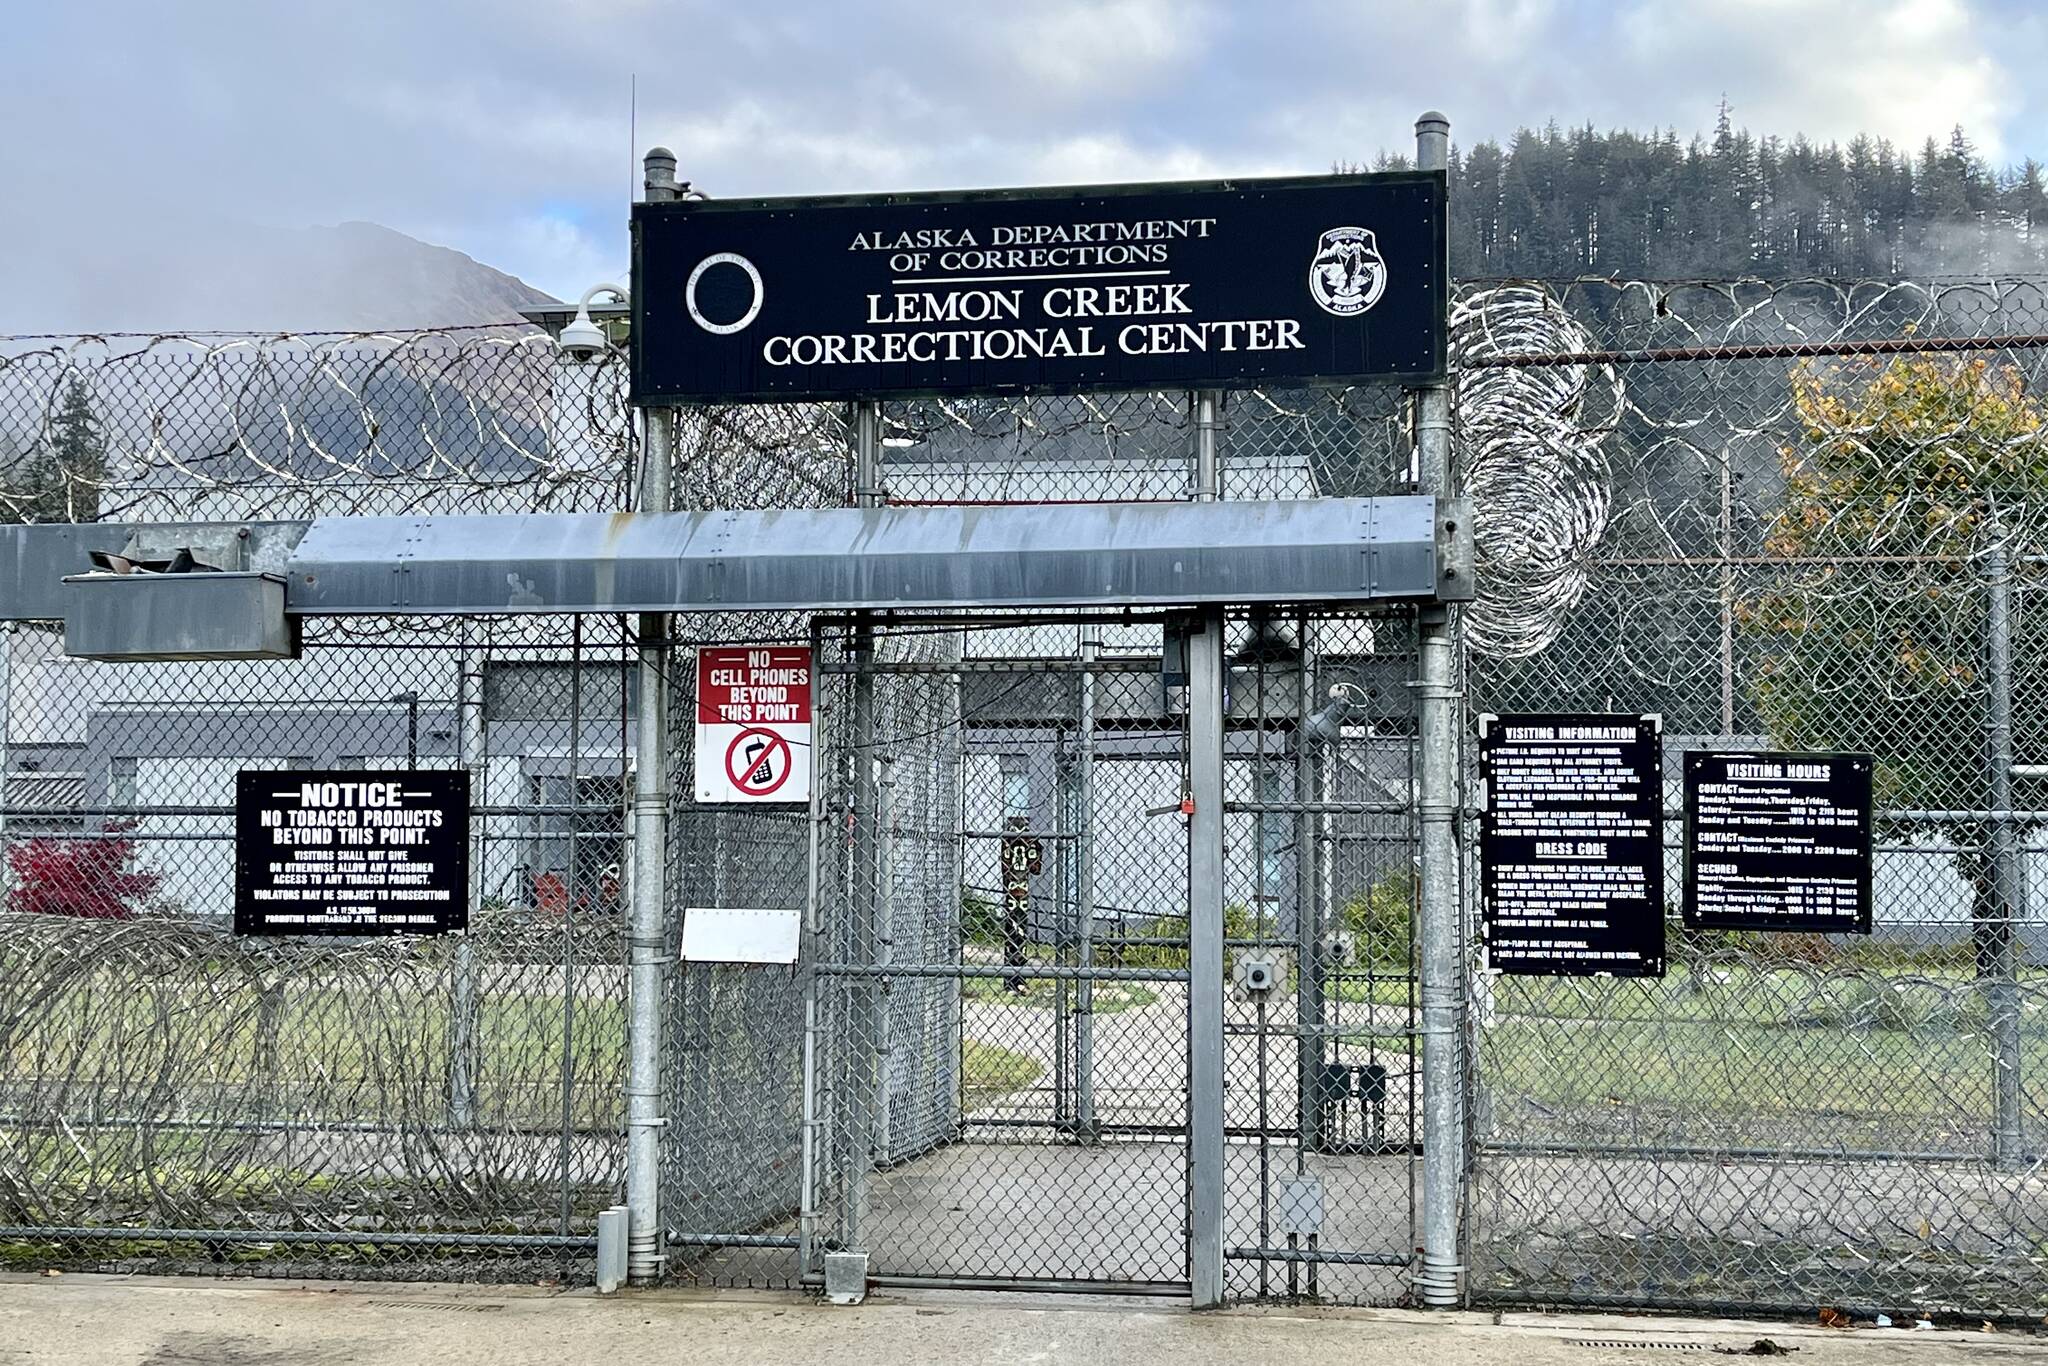 This photo shows Lemon Creek Correctional Center in Juneau. About 20% of the prison’s population was recently relocated to other facilities in South Central Alaska. The transfers come amid renovations to the aging facility. (Jonson Kuhn / Juneau Empire)